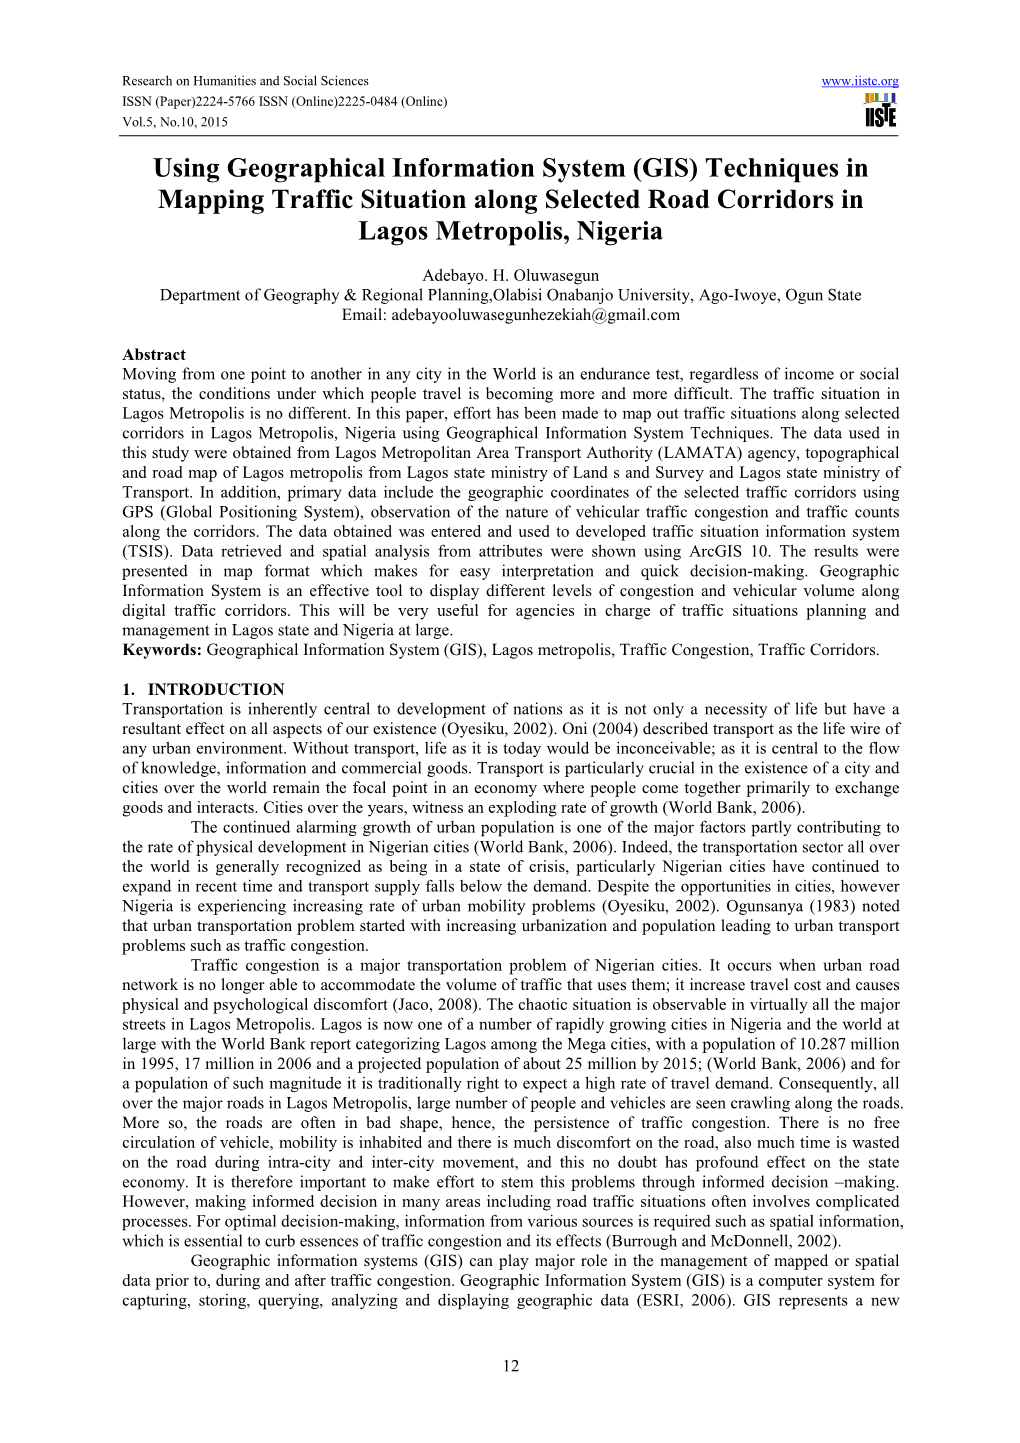 Using Geographical Information System (GIS) Techniques in Mapping Traffic Situation Along Selected Road Corridors in Lagos Metropolis, Nigeria